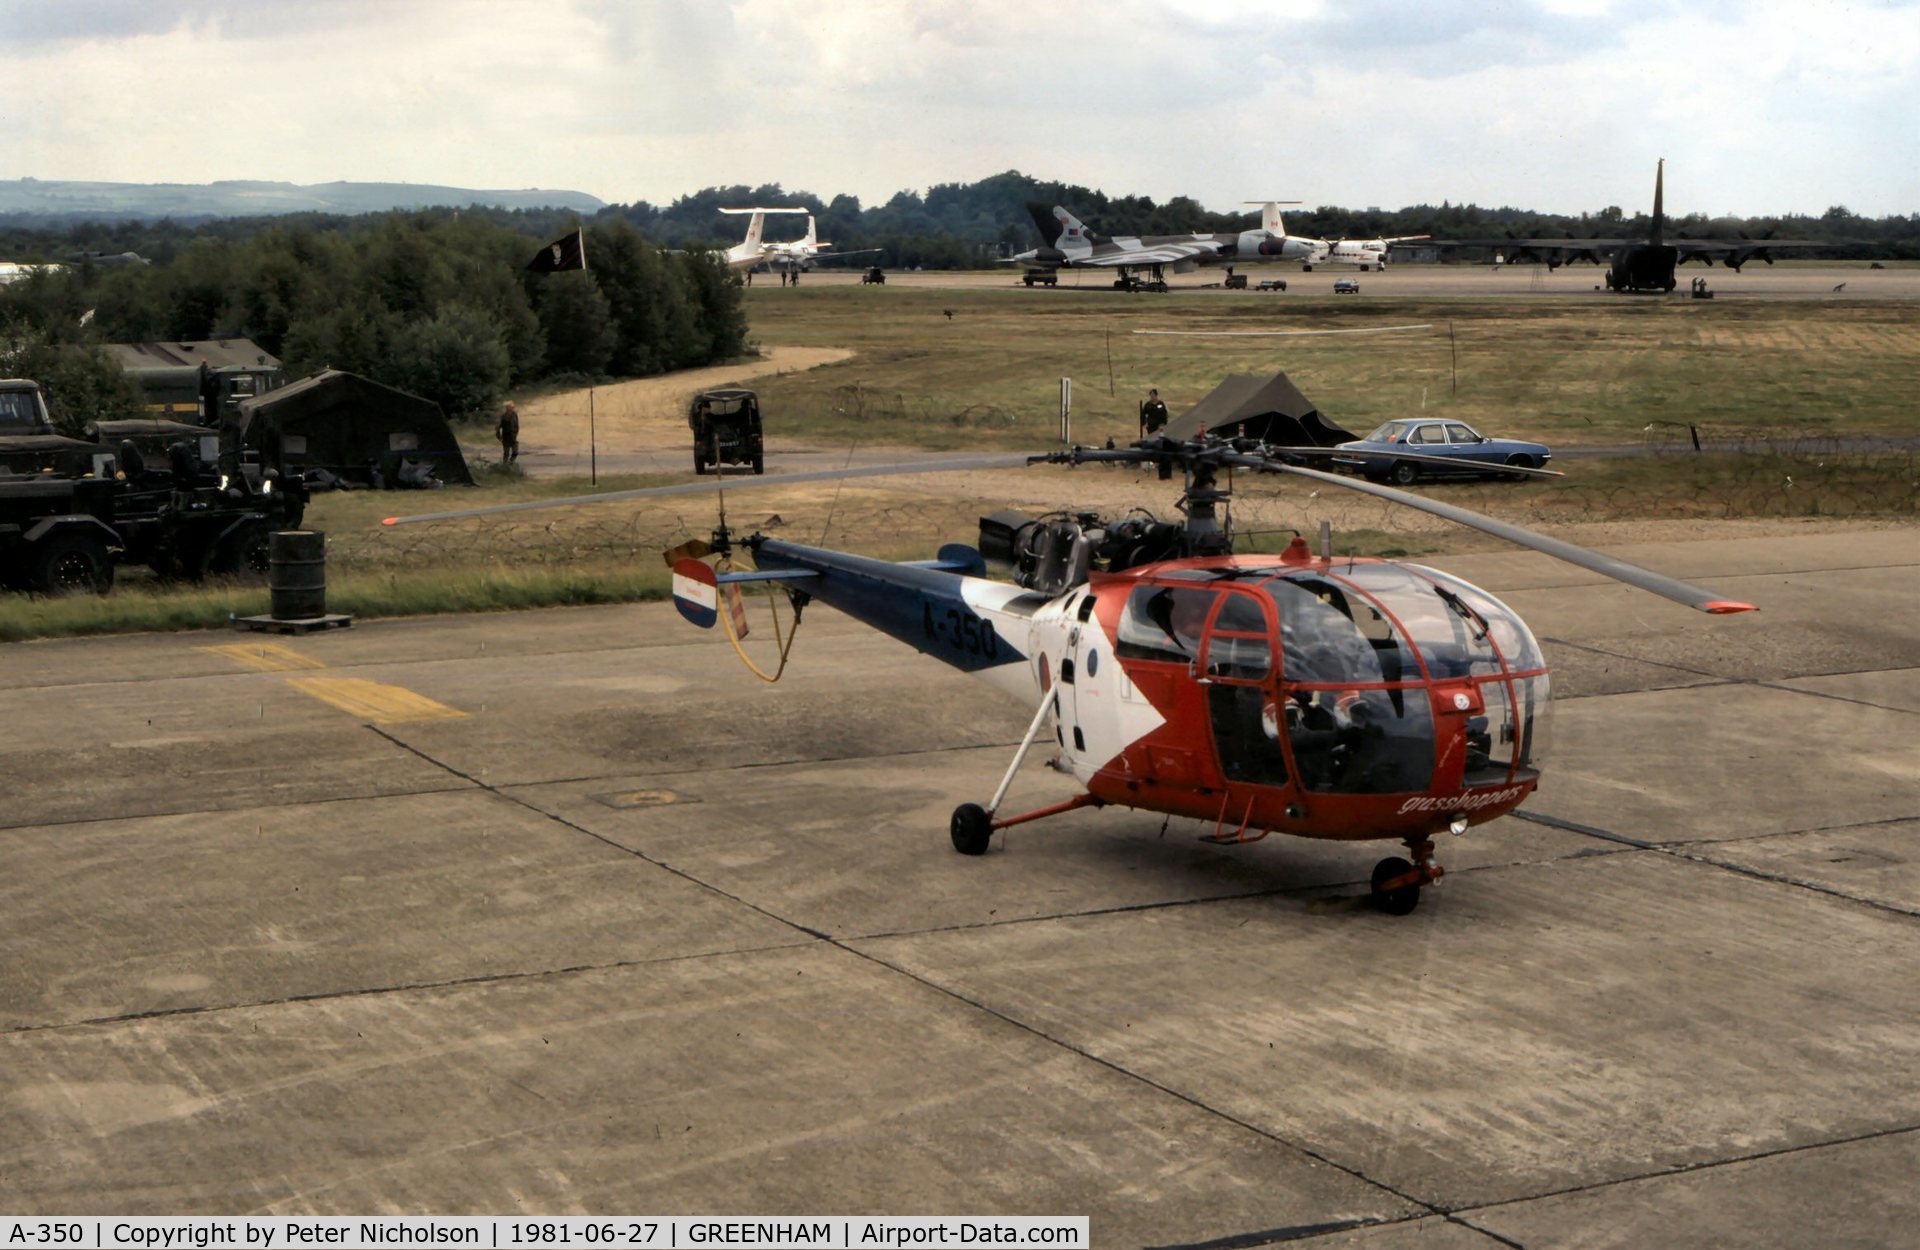 A-350, Sud SE-3160 Alouette III C/N 1350, Alouette III A-350 of the Royal Netherlands Air Force's Grasshoppers aerial display team at the 1981 Intnl Air Tattoo at RAF Greenham Common.